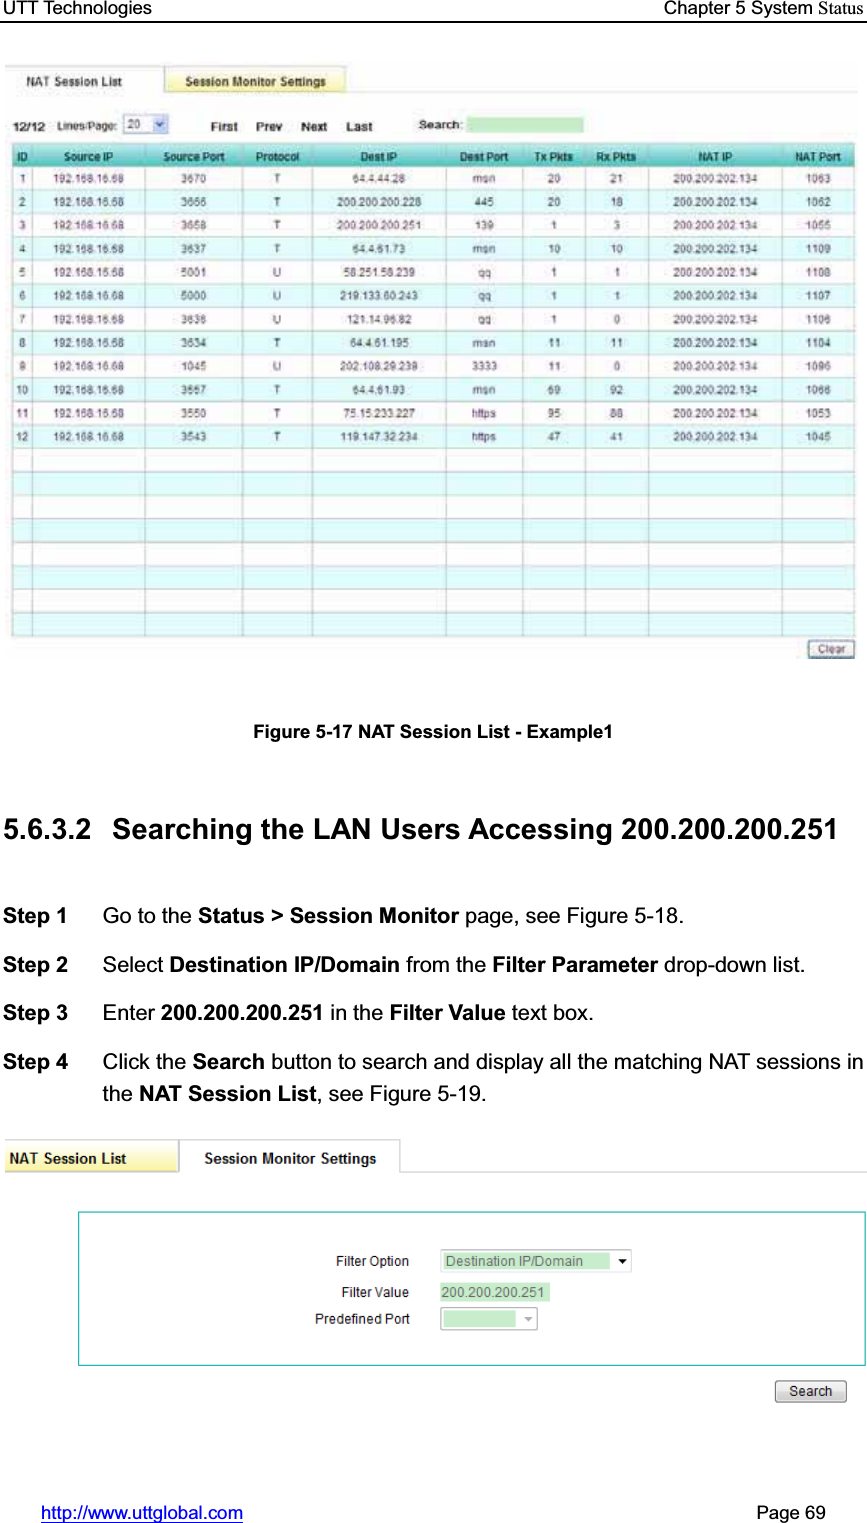 UTT Technologies    Chapter 5 System Statushttp://www.uttglobal.com                                                       Page 69 Figure 5-17 NAT Session List - Example1 5.6.3.2 Searching the LAN Users Accessing 200.200.200.251 Step 1  Go to the Status &gt; Session Monitor page, see Figure 5-18. Step 2  Select Destination IP/Domain from the Filter Parameter drop-down list. Step 3  Enter 200.200.200.251 in the Filter Value text box. Step 4  Click the Search button to search and display all the matching NAT sessions in the NAT Session List, see Figure 5-19. 